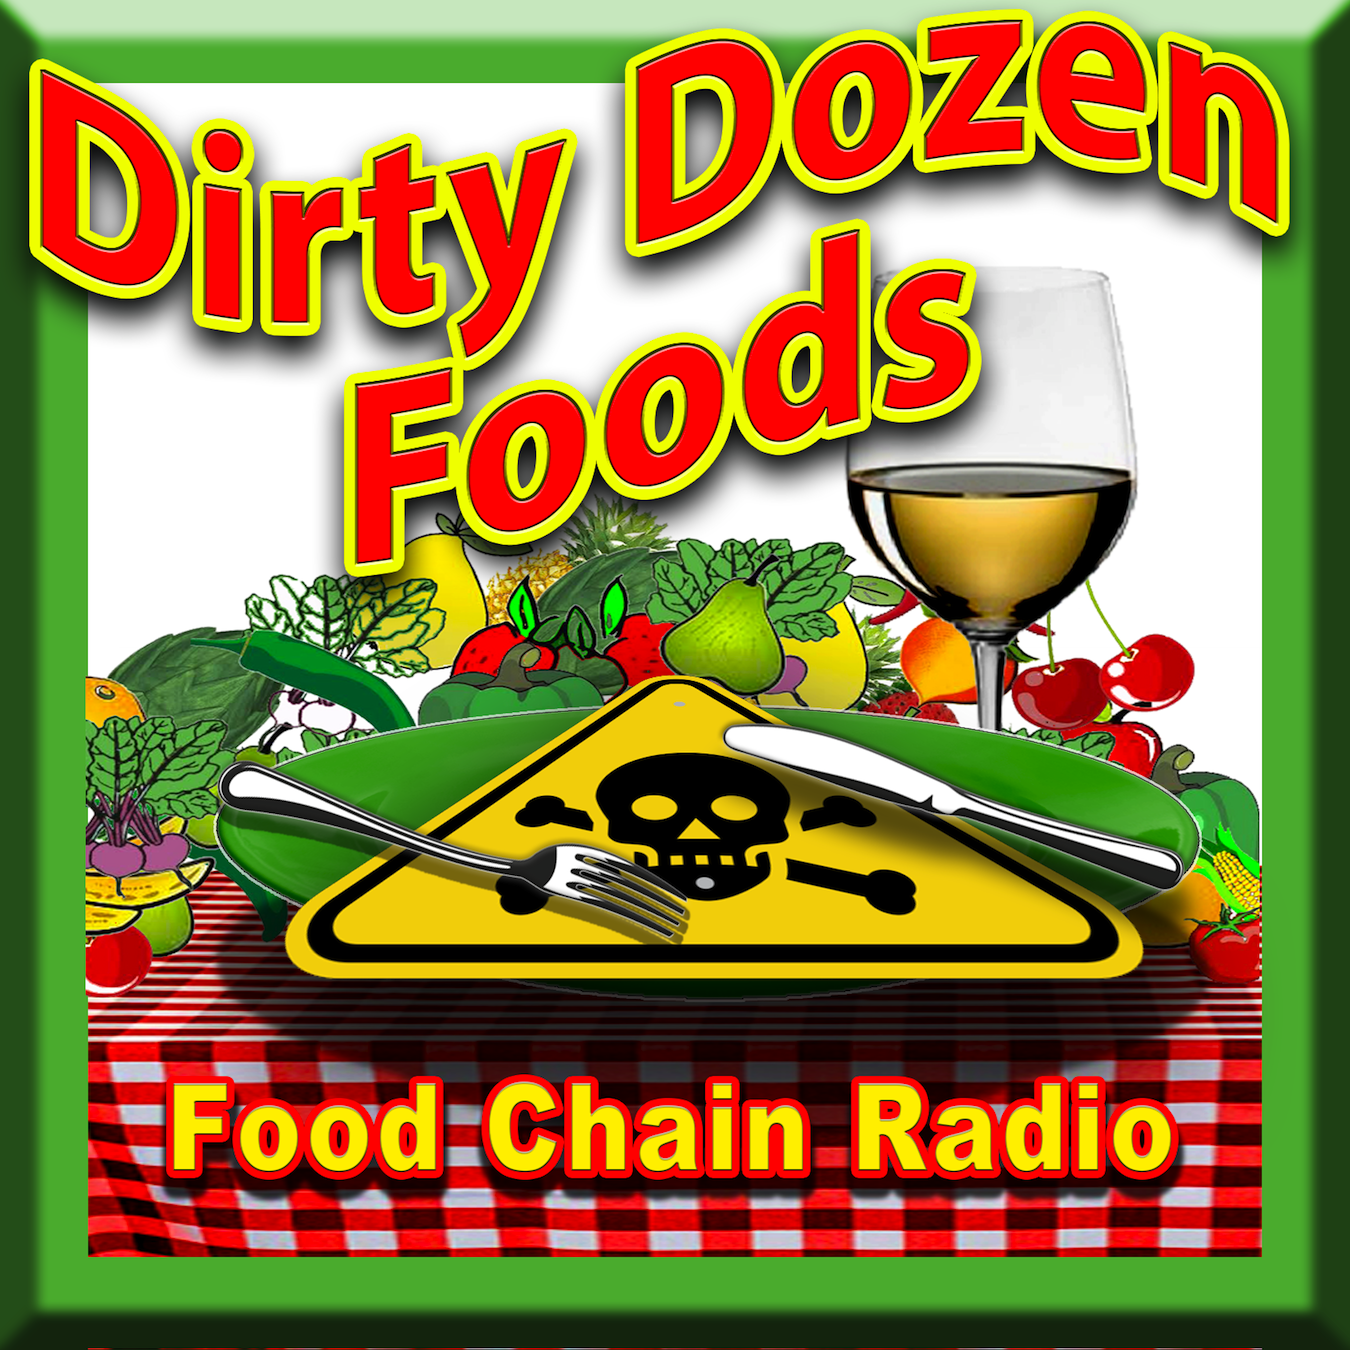 Michael Olson Food Chain Radio – Dirty Dozen Foods –Is food contaminated with pesticides safe to eat?